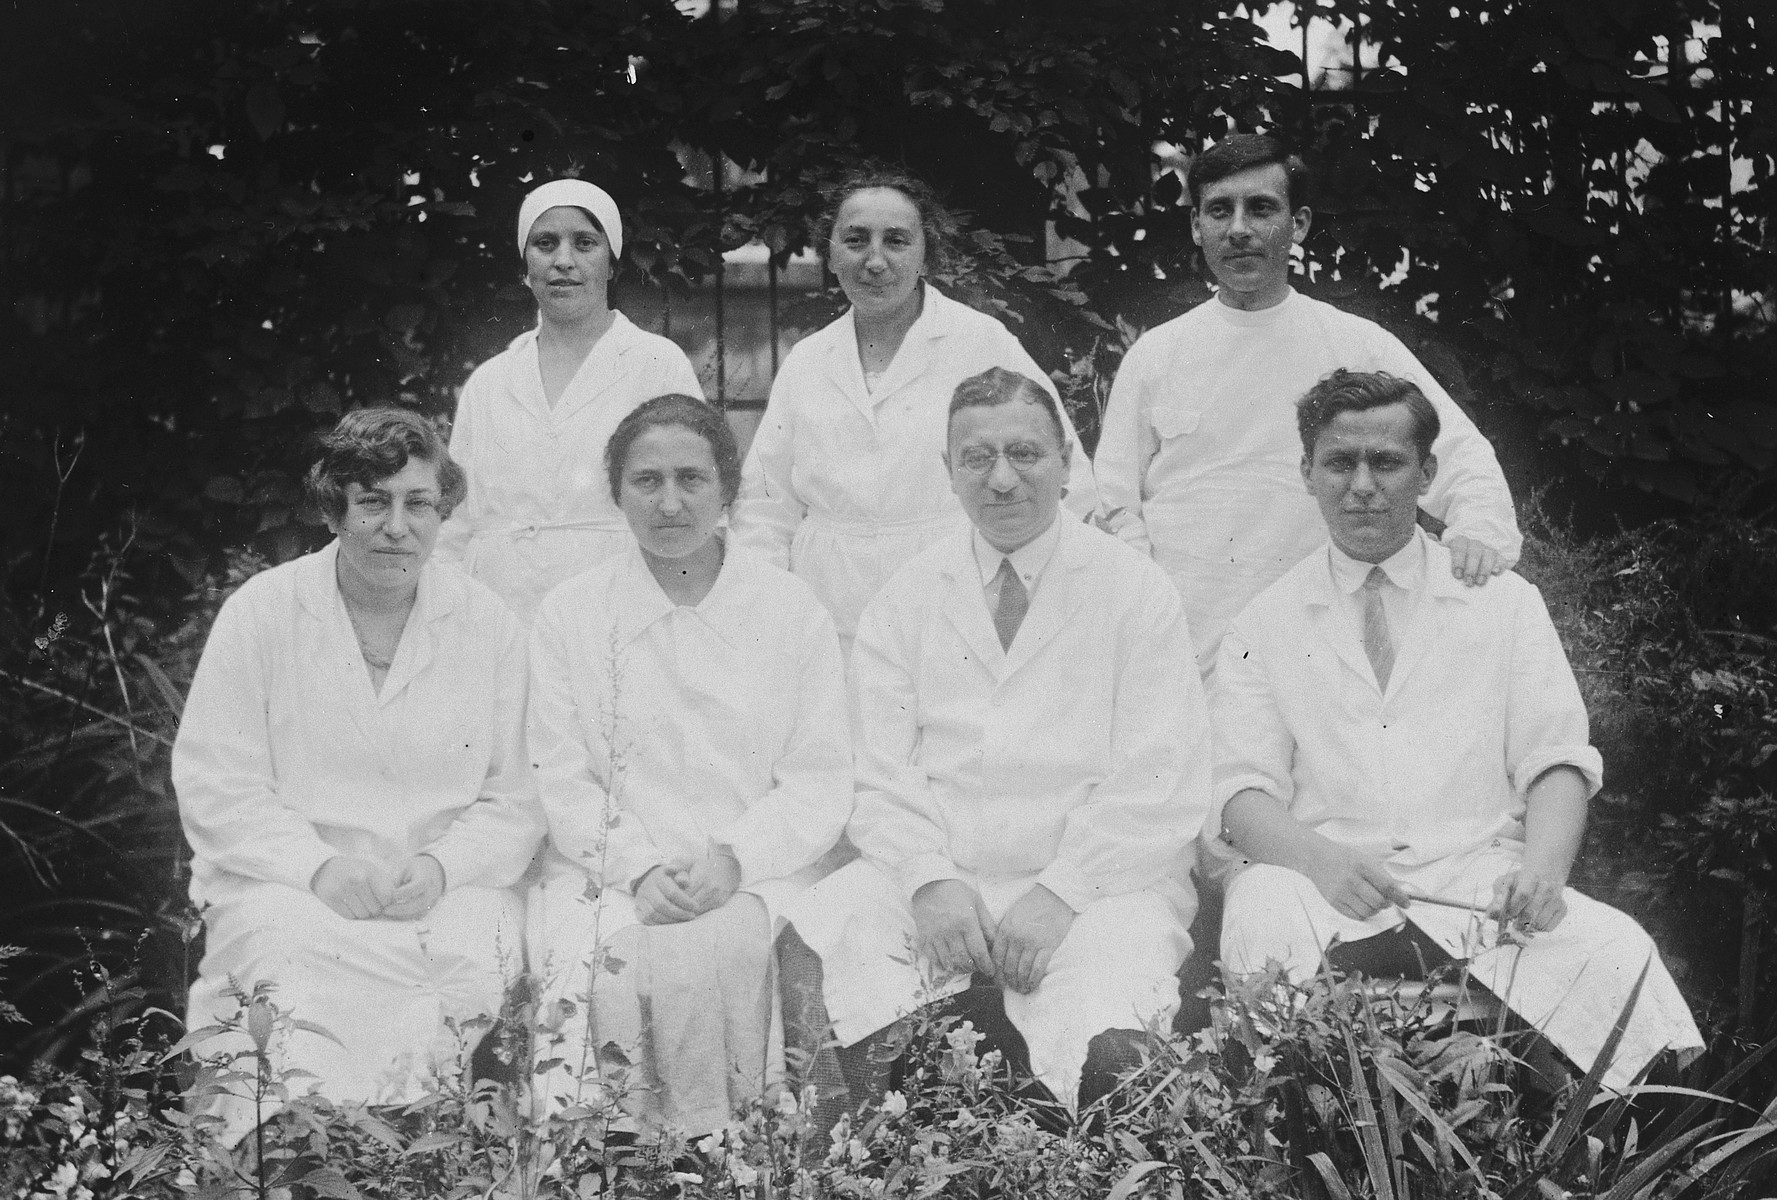 Group portrait of the staff of the Jewish hospital for women and children in Vilna.

Dr. Elias Sedlis is pictured in the front row, third from the left.  Dr Matylda Surawicz is in the front row, on the far left.